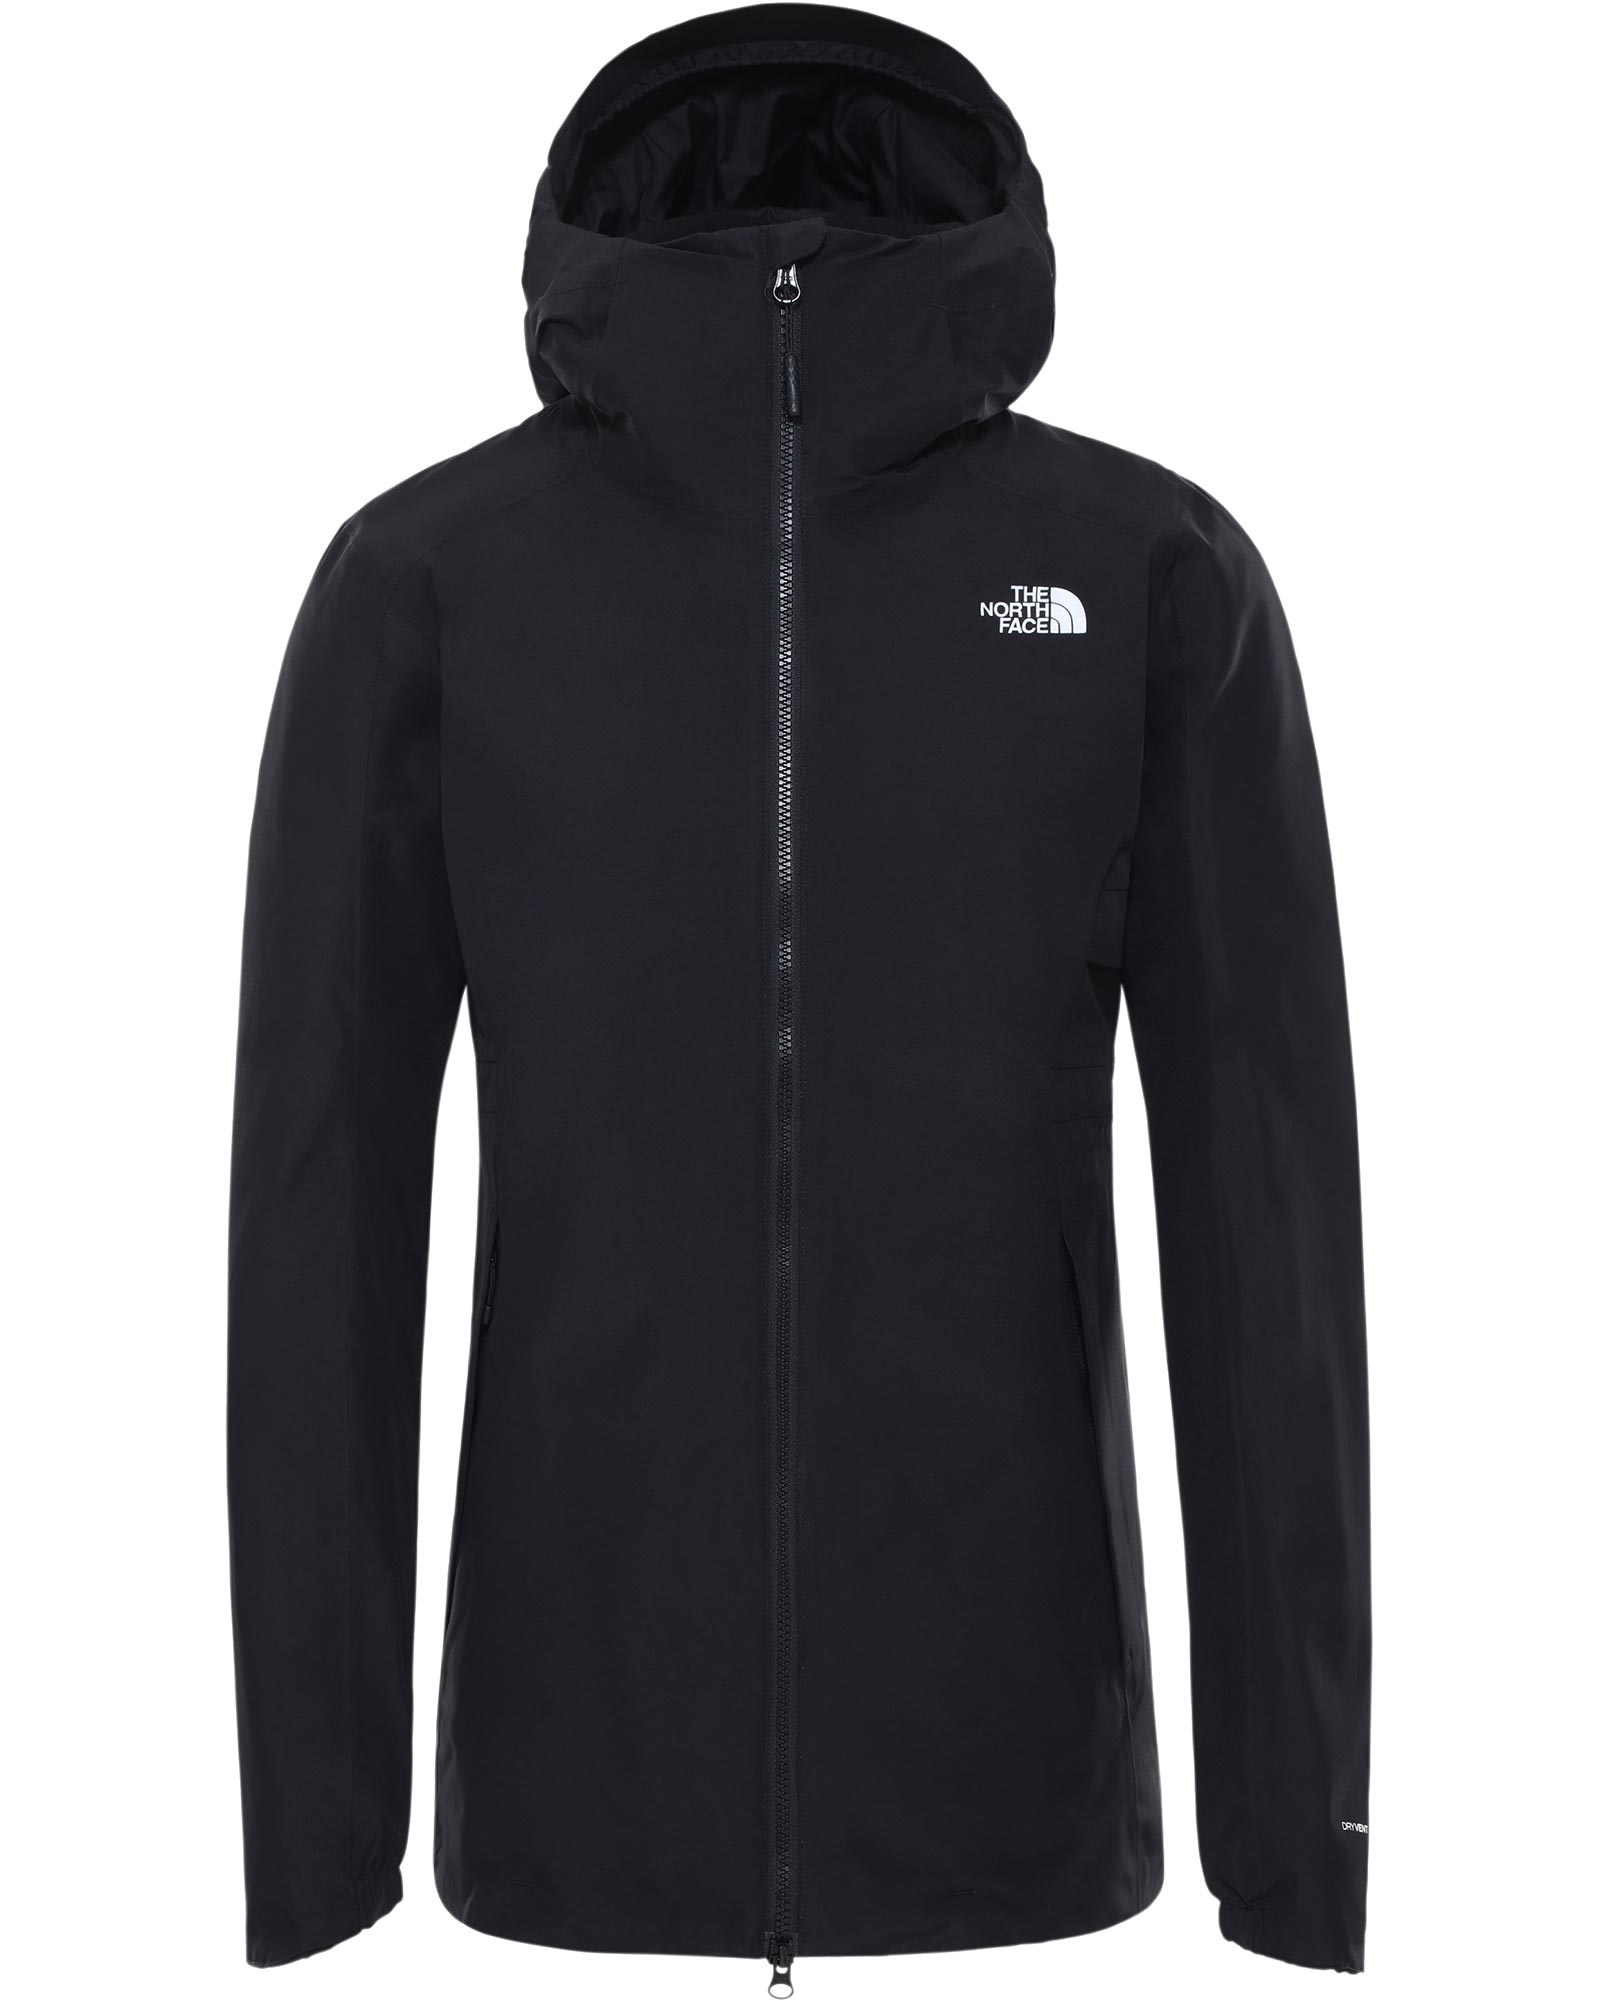 The North Face Hikesteller Womens Insulated Parka Jacket